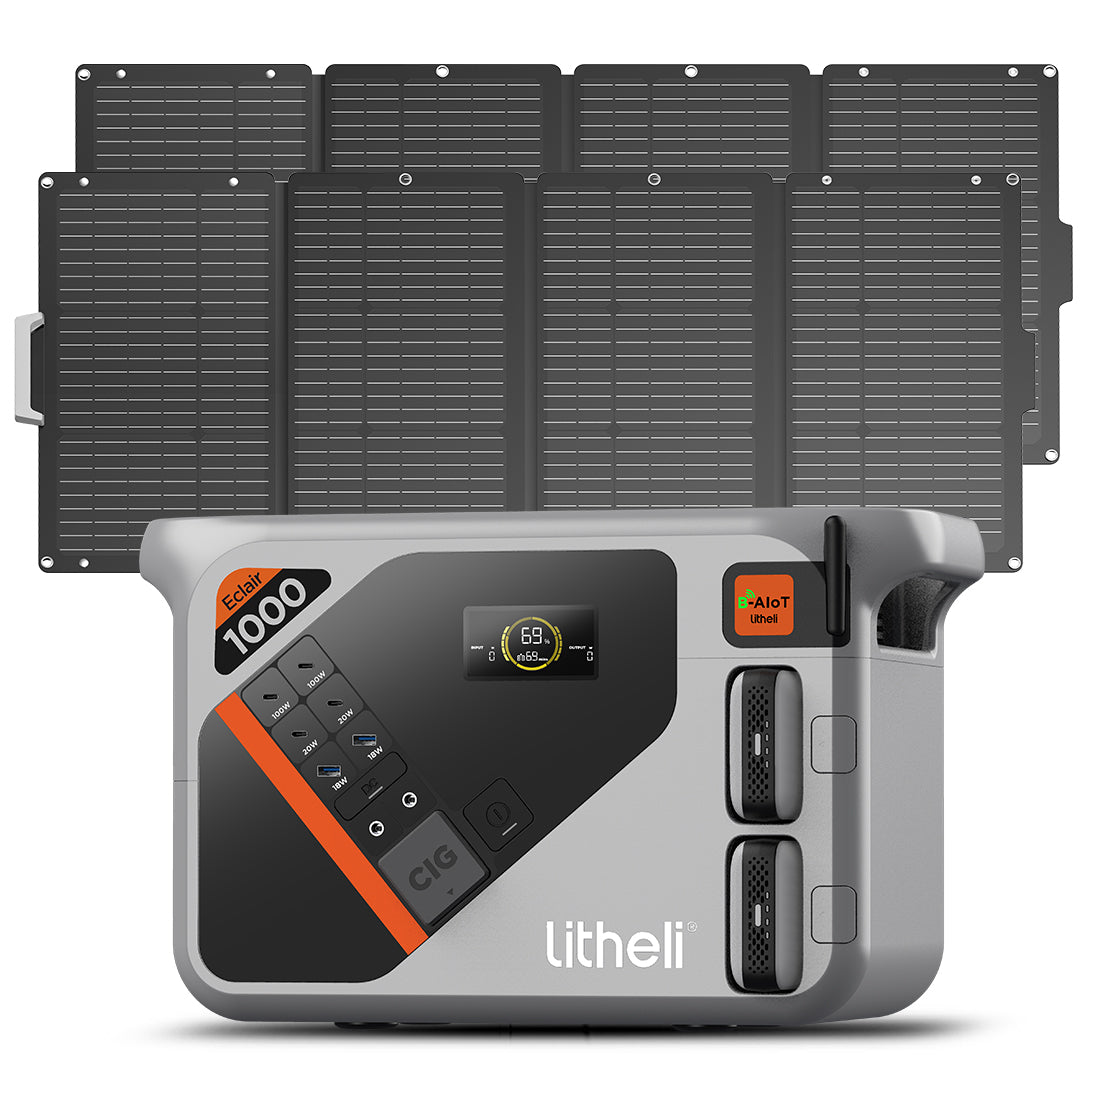 Litheli B1000 Portable Power Station with solar panel